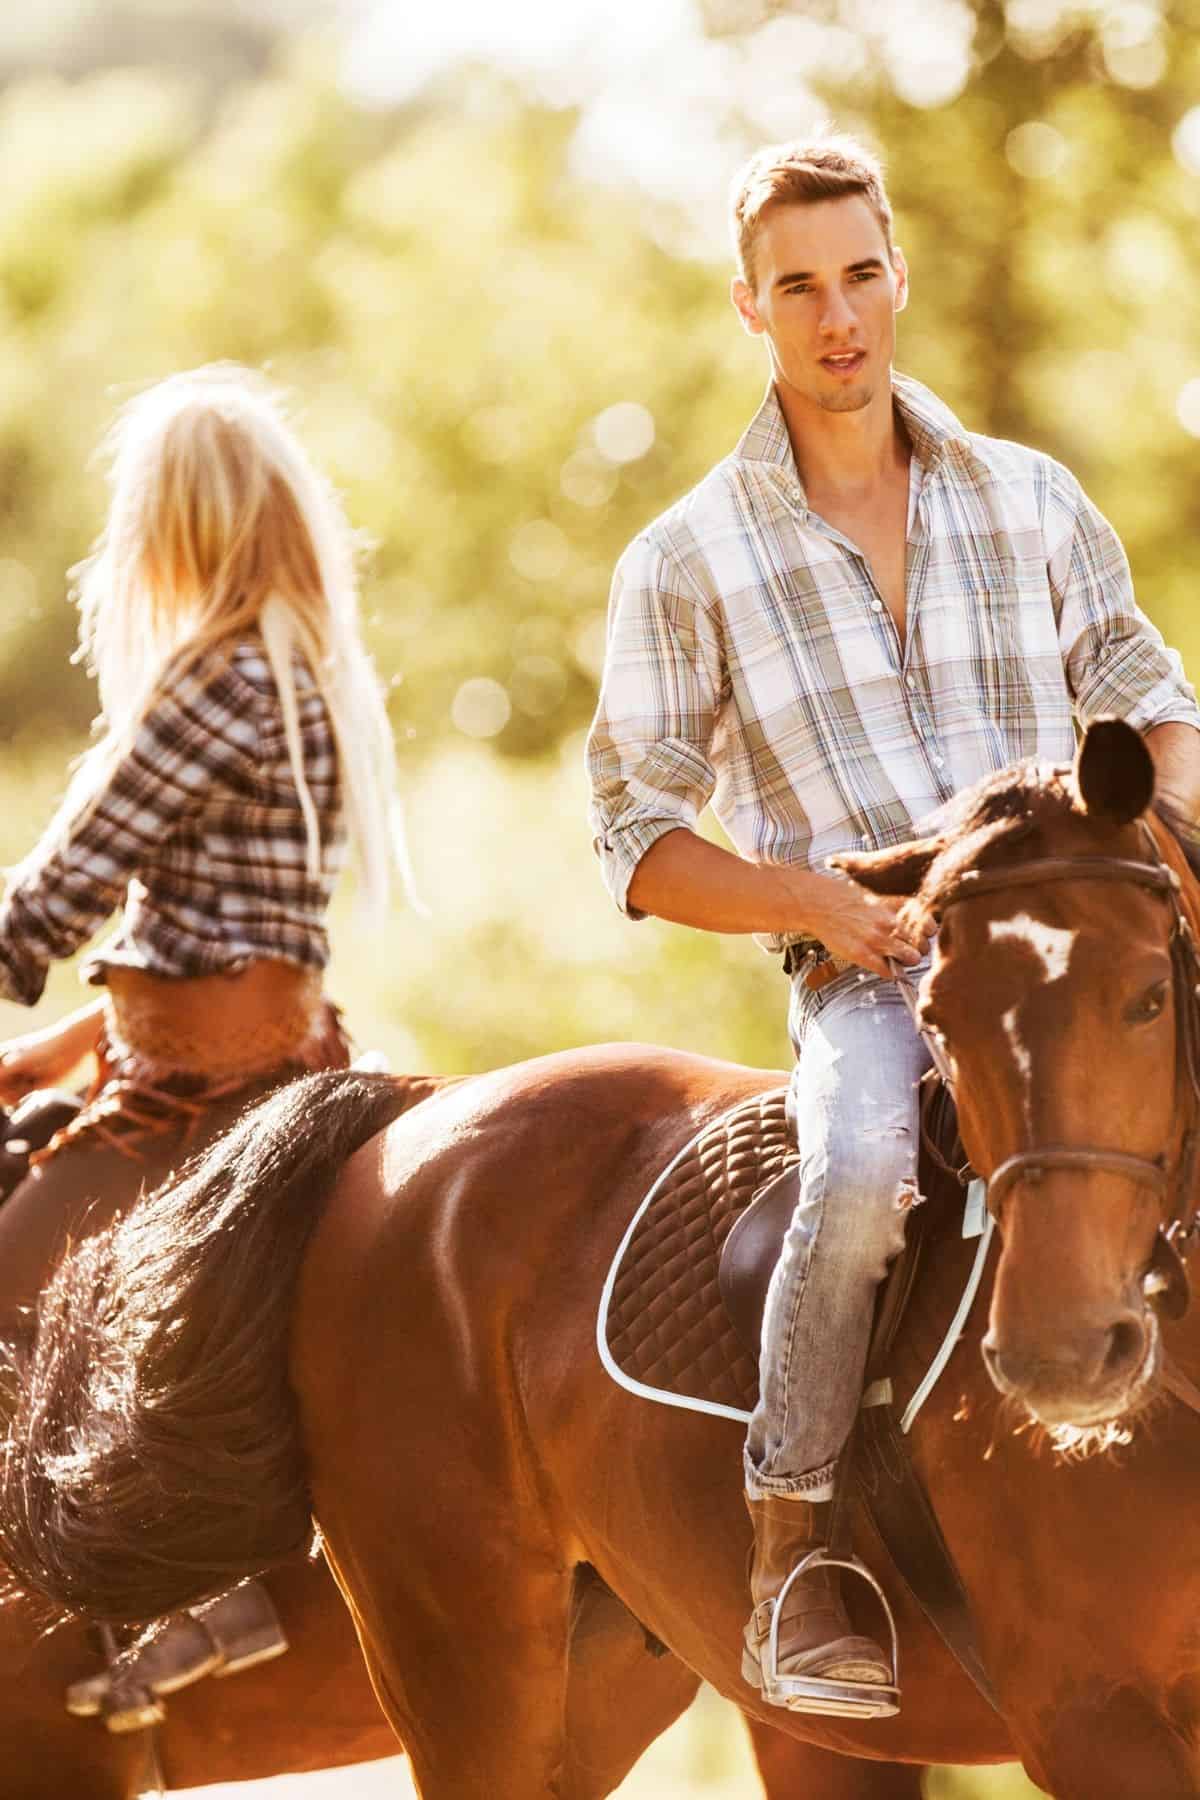 Couple on brown horses with glowing sunlight background